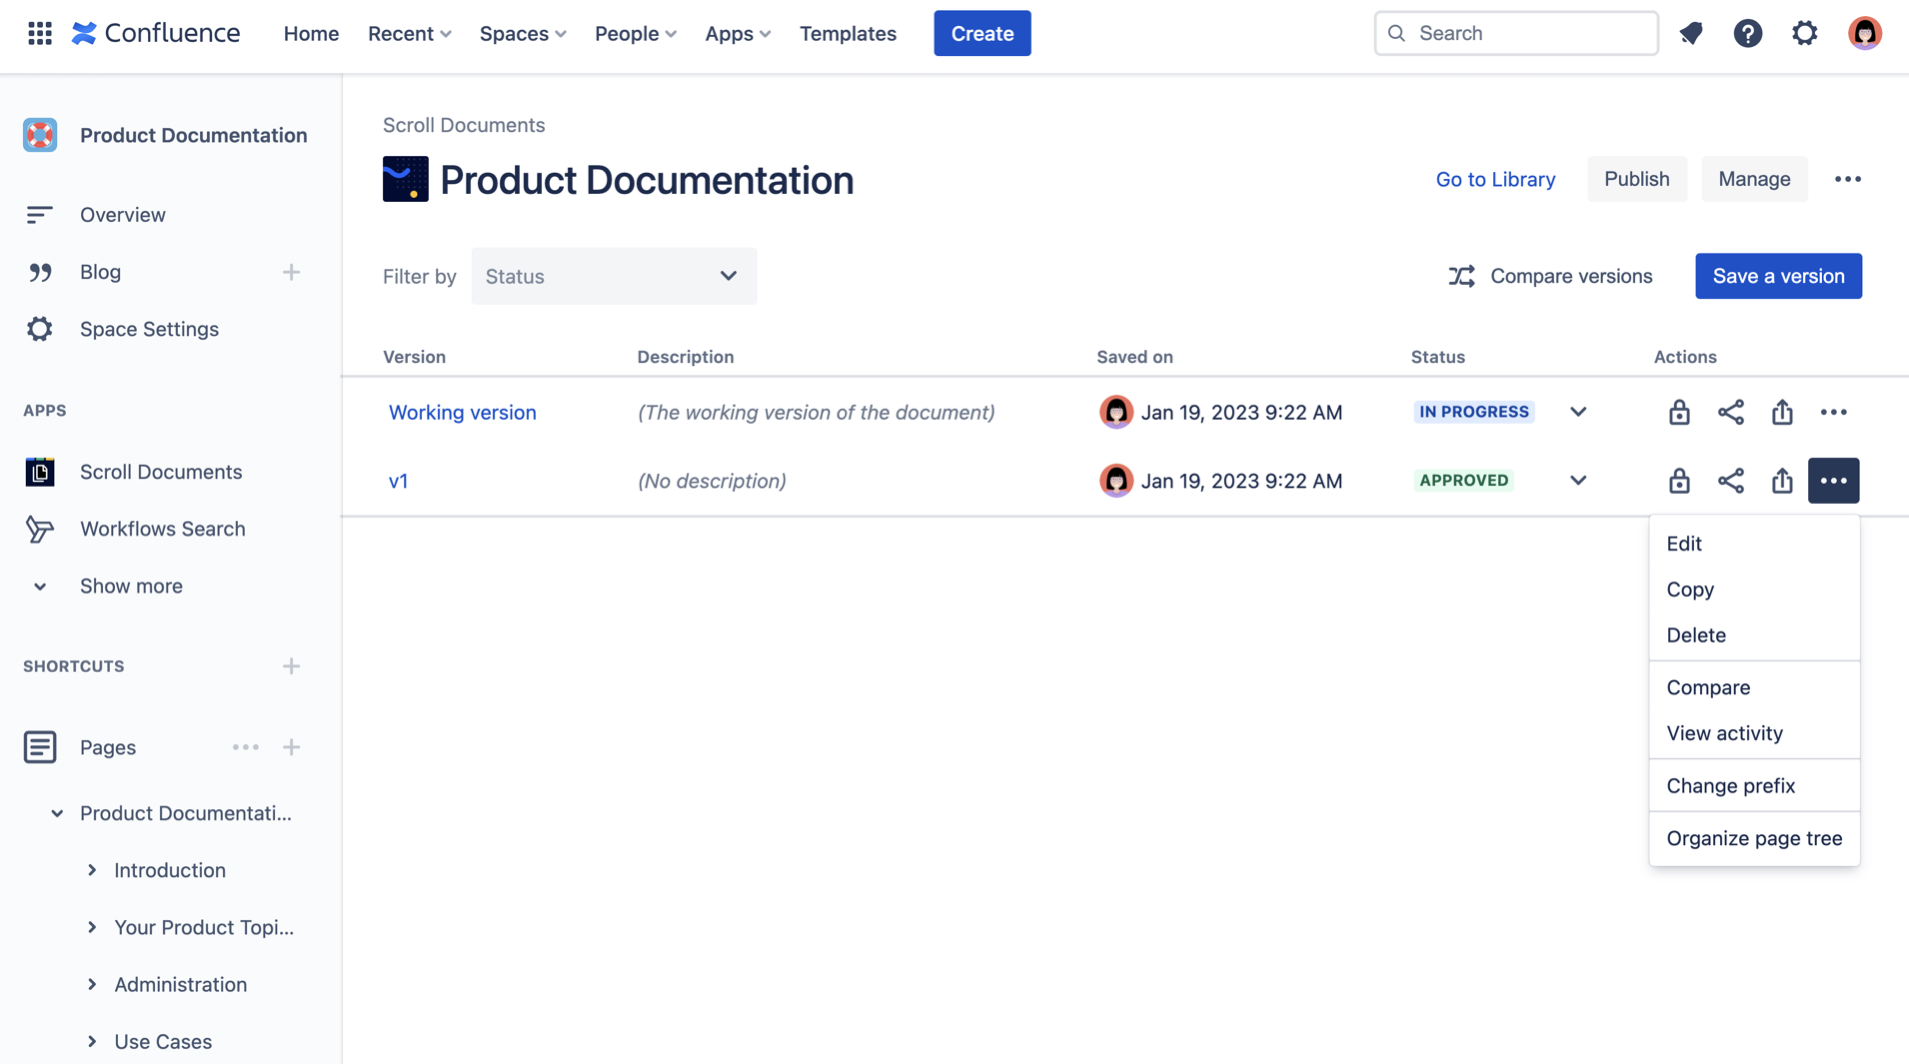 More document actions selected within the Document Manager